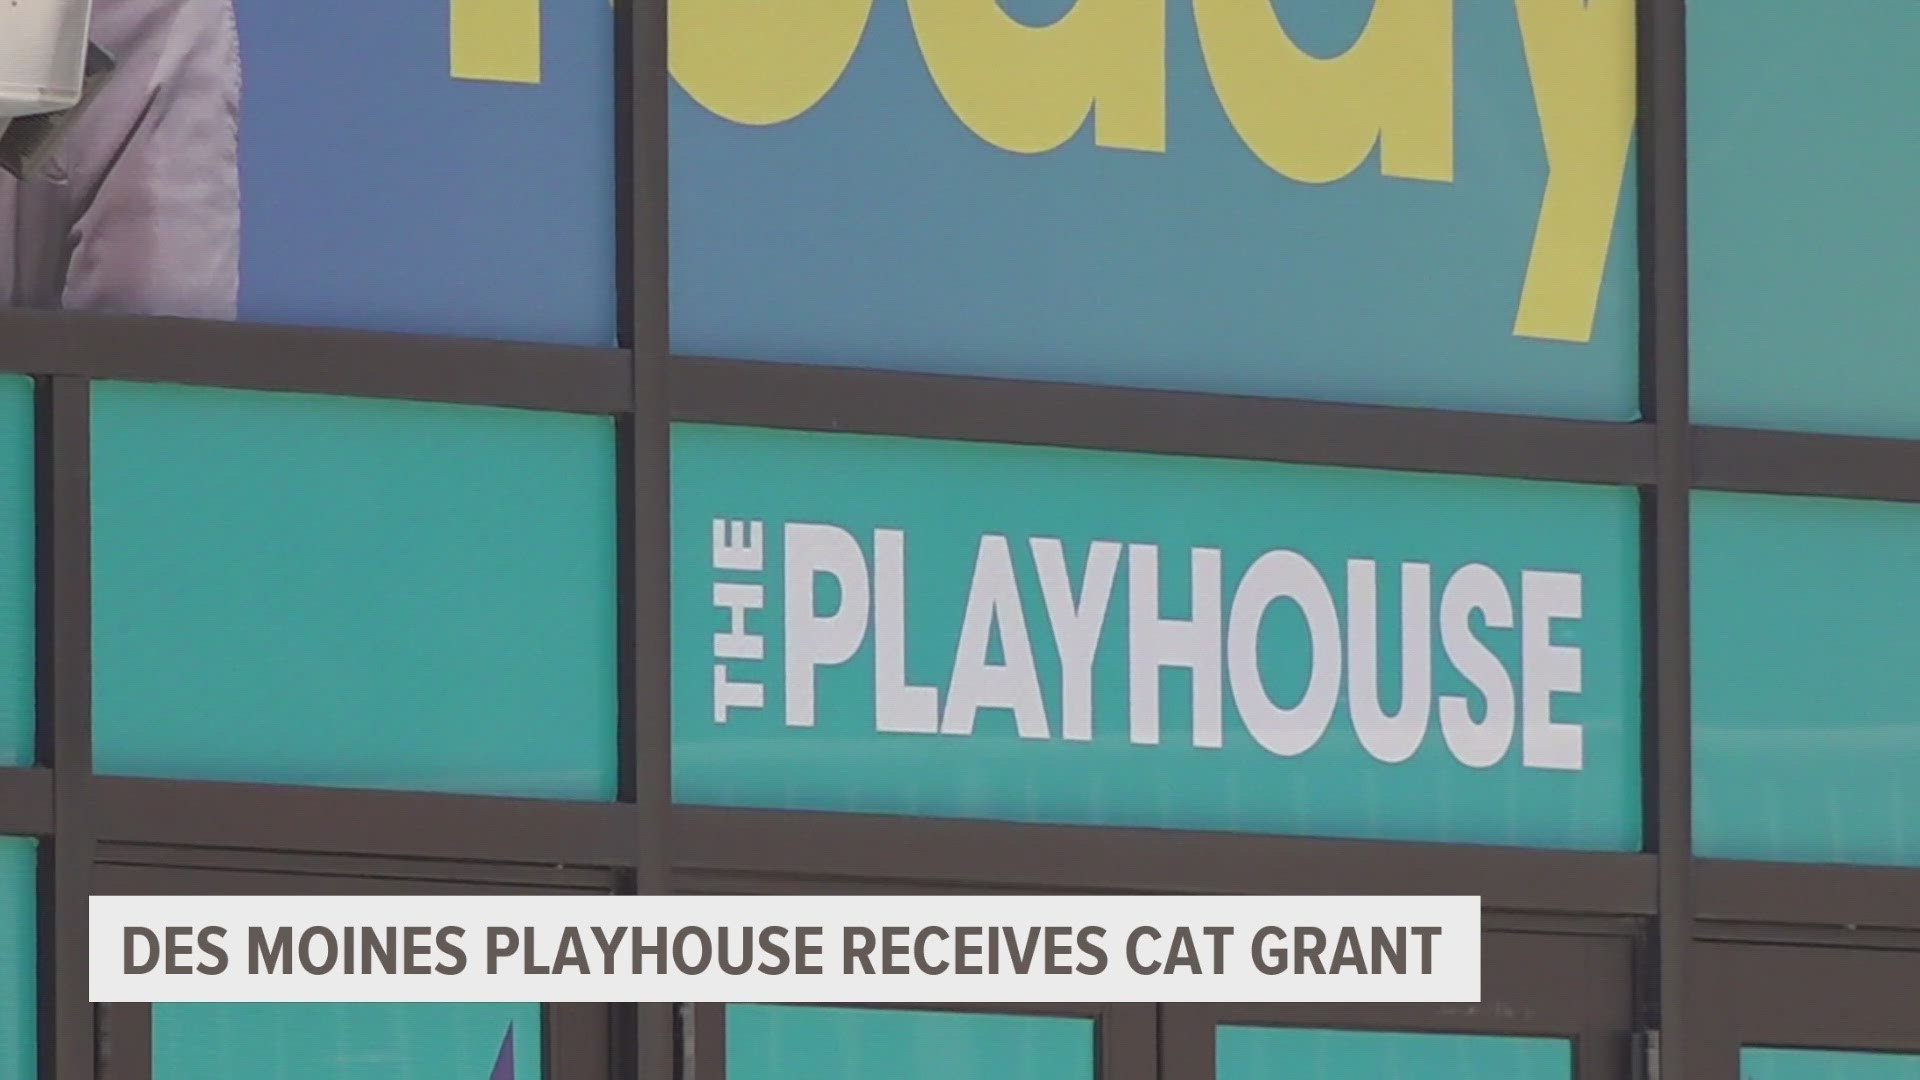 The Playhouse was recently awarded $400,000 through a Community Attraction and Tourism grant through the Enhance Iowa program.